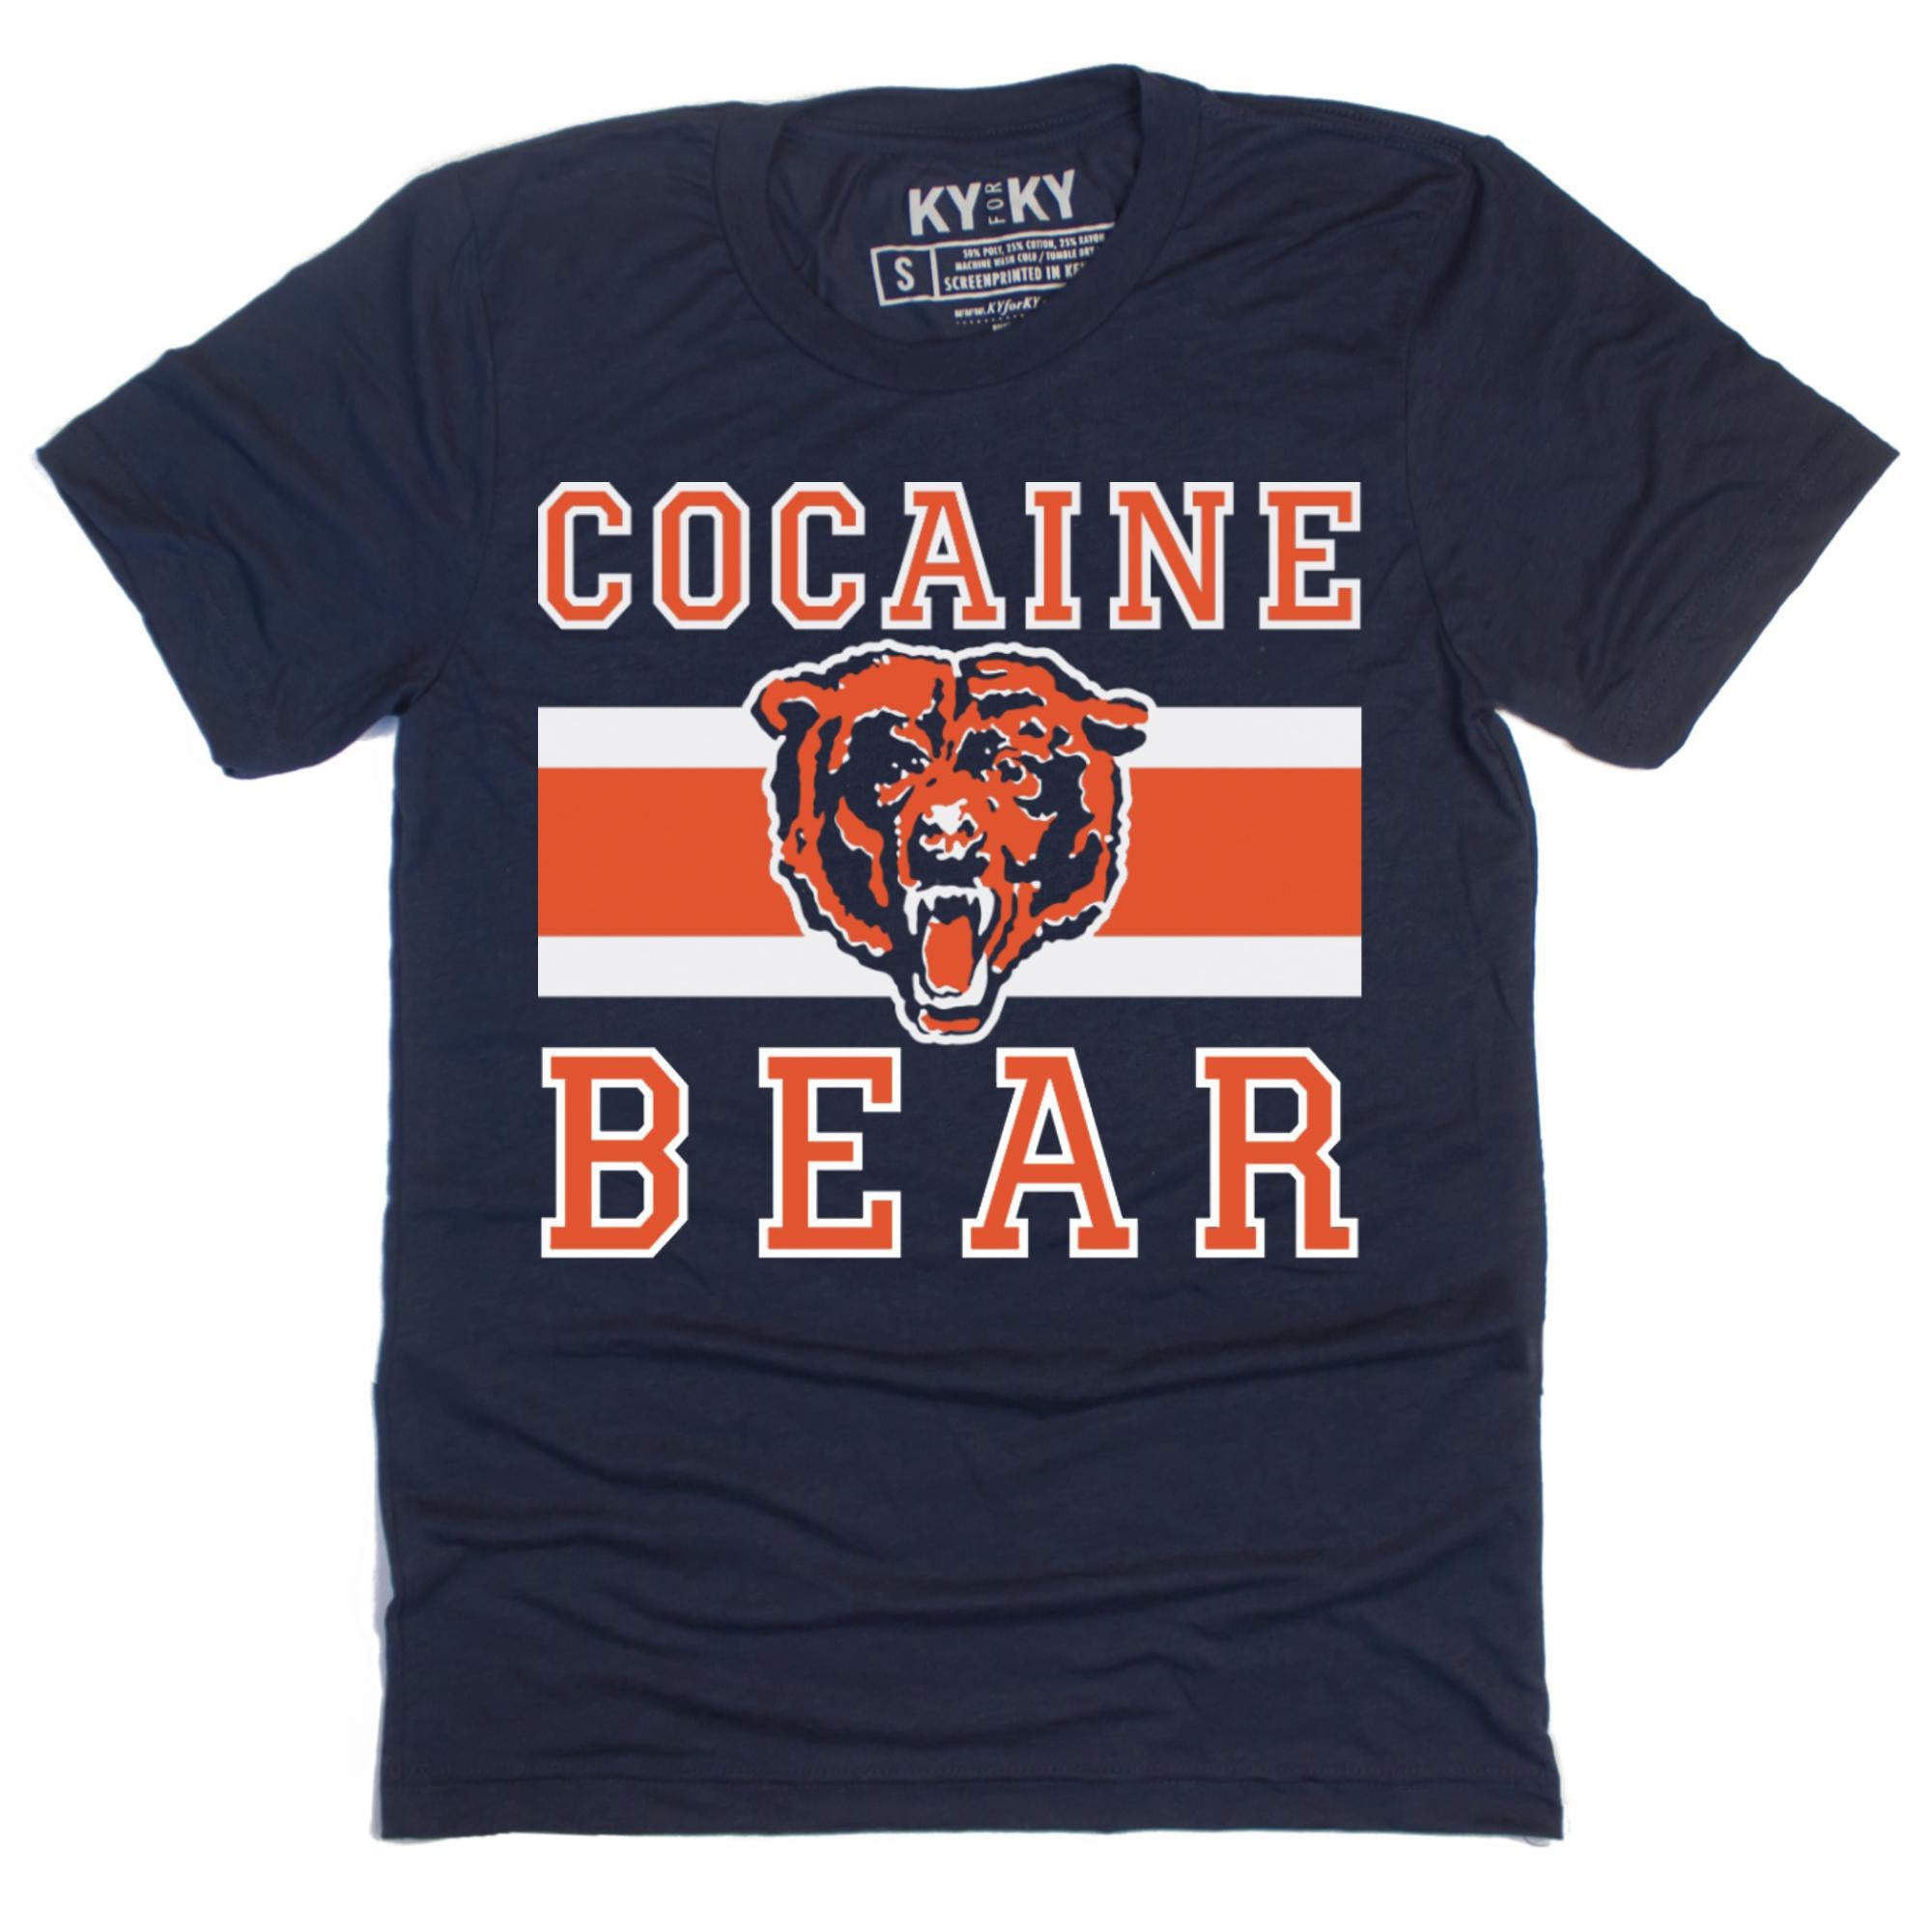 Cocaine Bear Vintage T-Shirt-T-Shirt-KY for KY Store